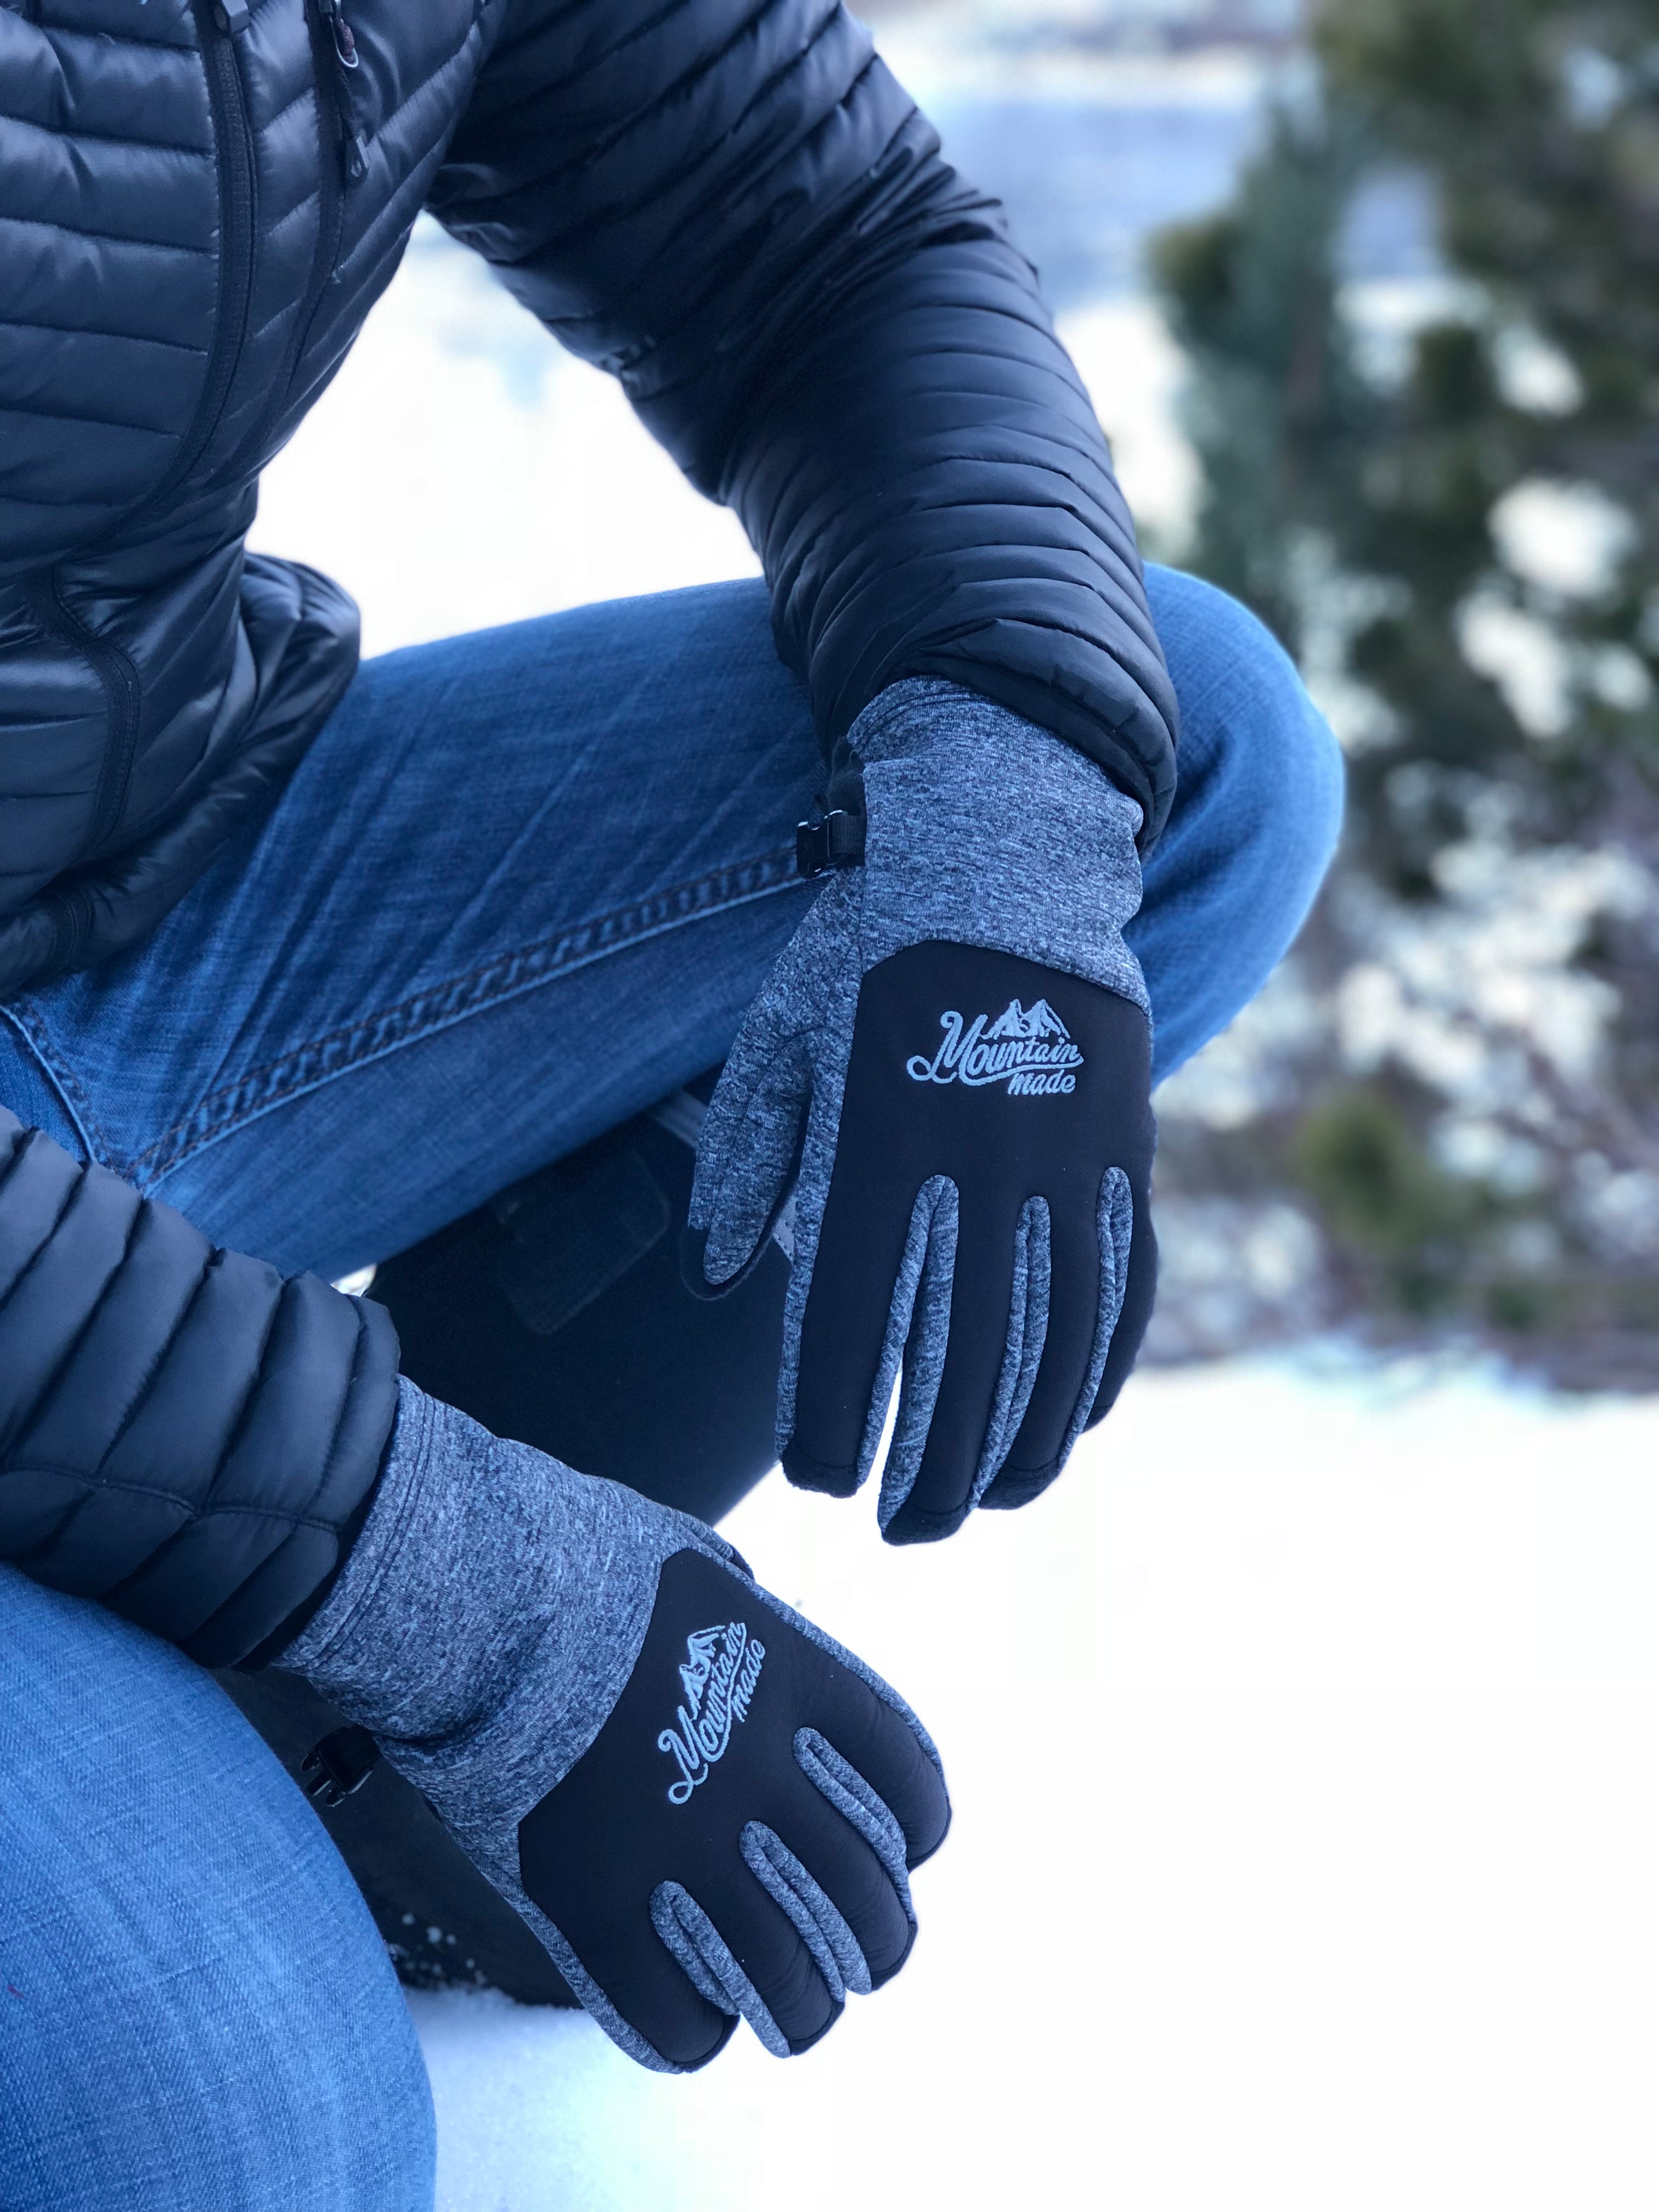 Bierstadt Gloves Pack of 4 + FREE SHIPPING! | Mountain Made